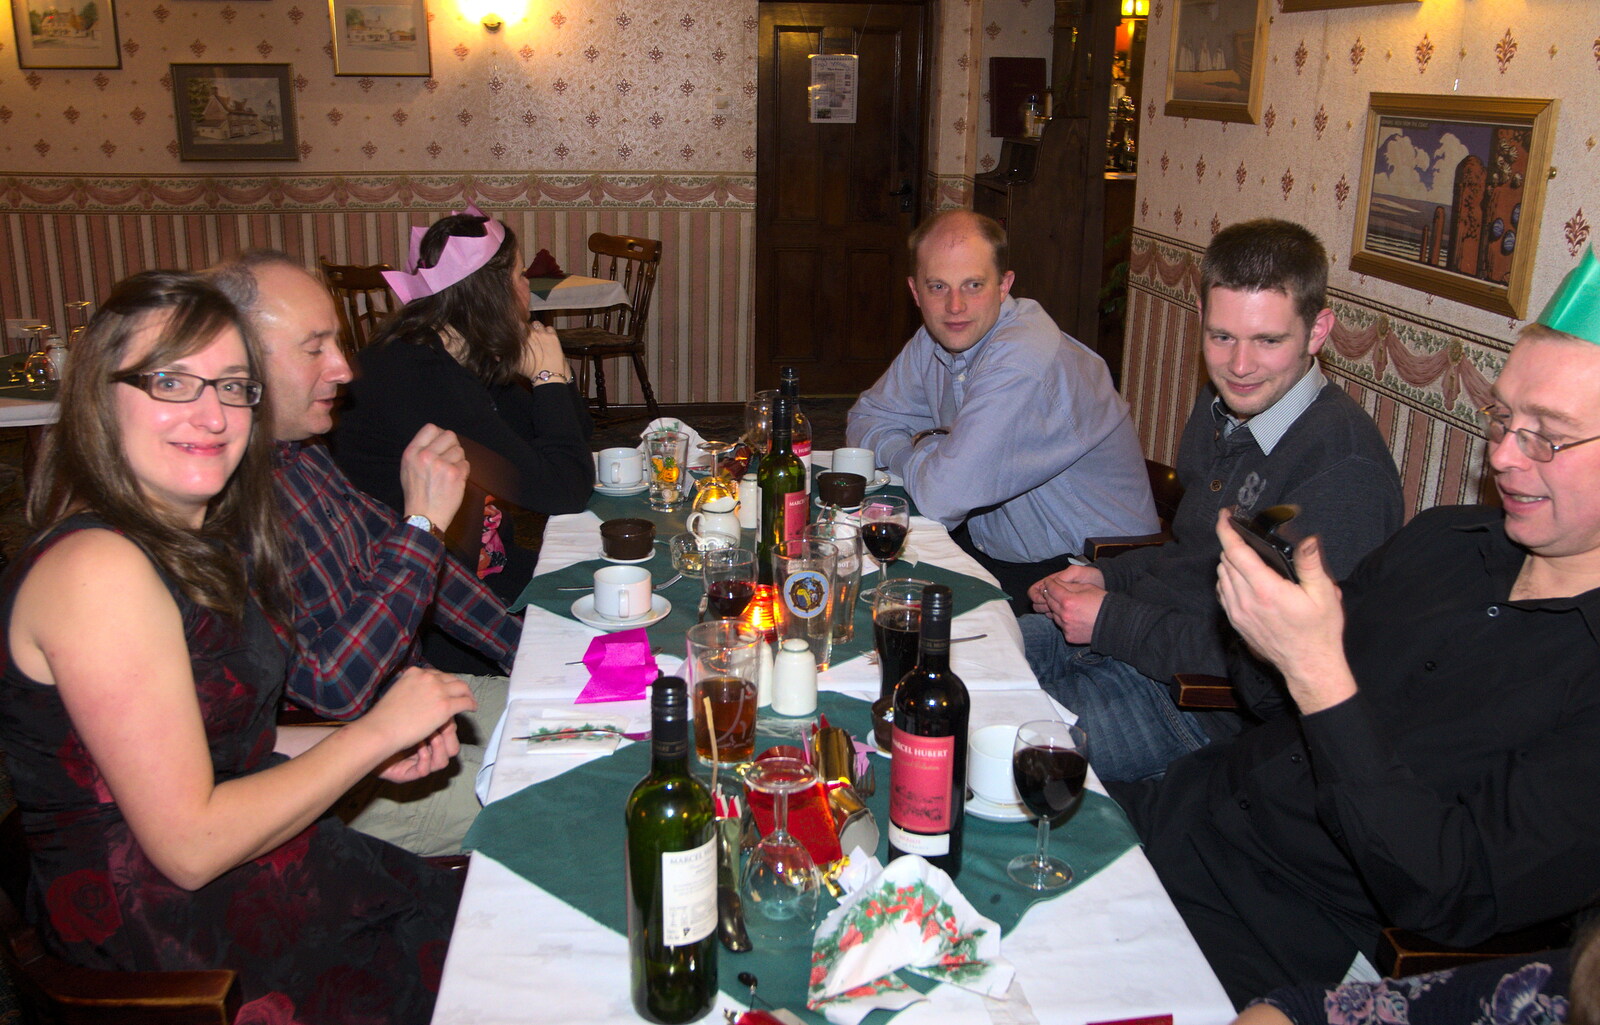 Suey, DH, Claire, Paul, The Boy Phil and Marc from The BSCC Christmas Dinner, Brome, Suffolk - 7th December 2013